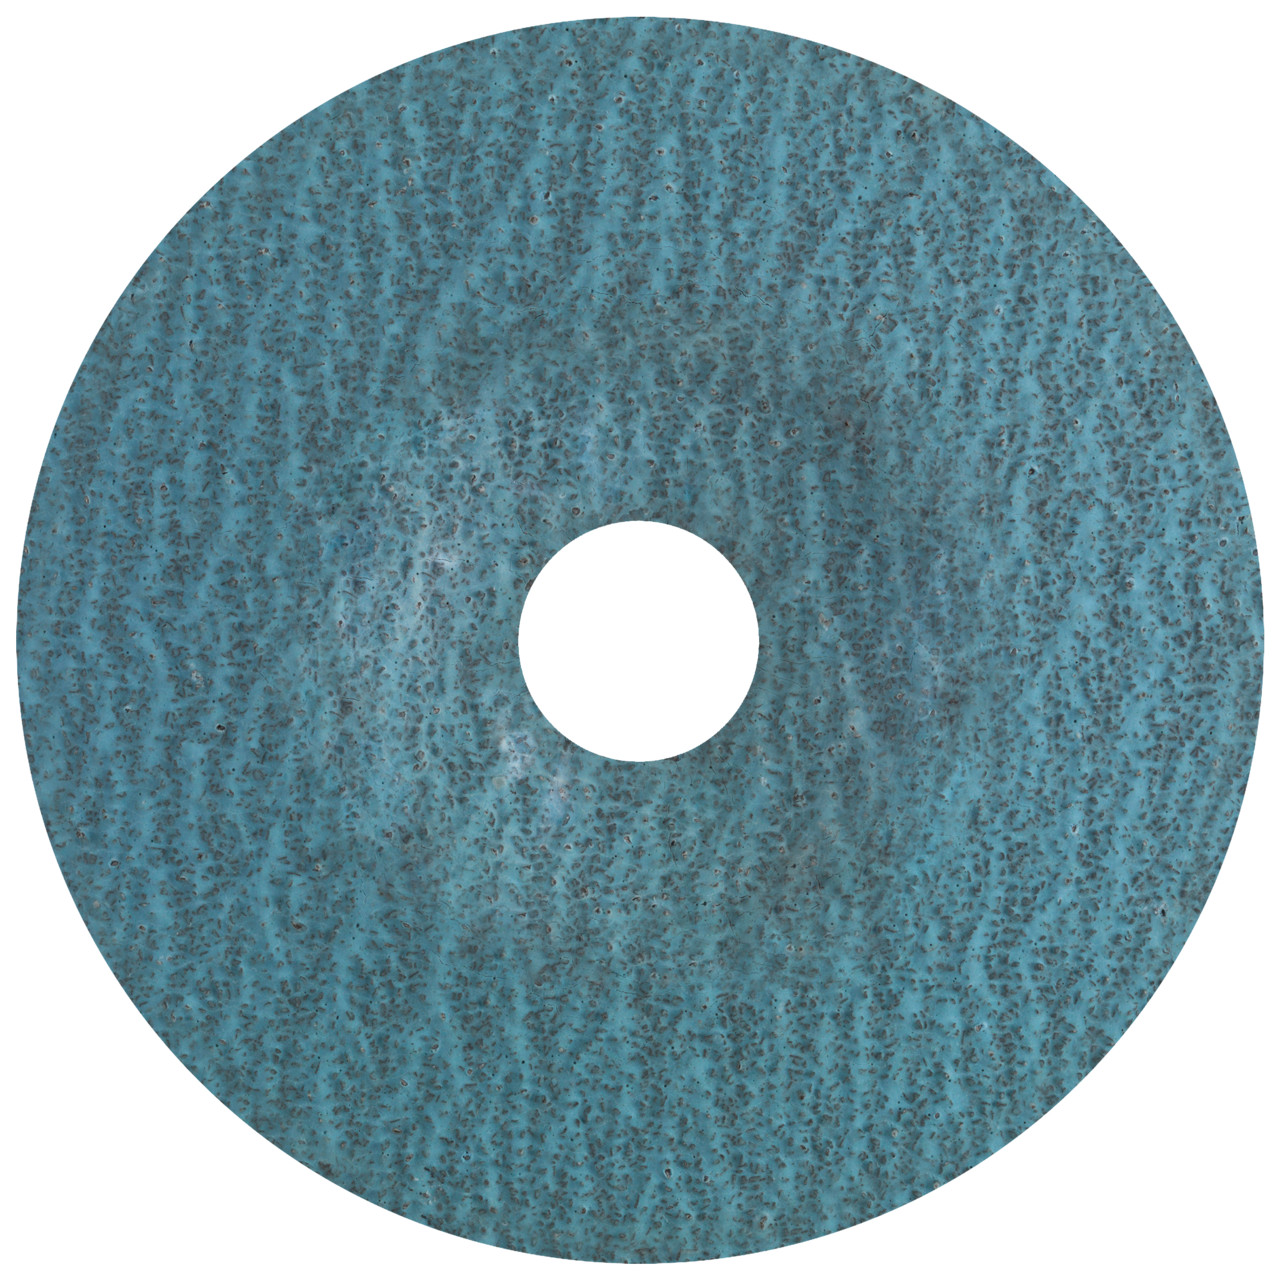 Tyrolit ZA-P48 N NATURAL FIBRE DISC DxH 180x22 For steel and stainless steel, P36, form: DISC, Art. 706130